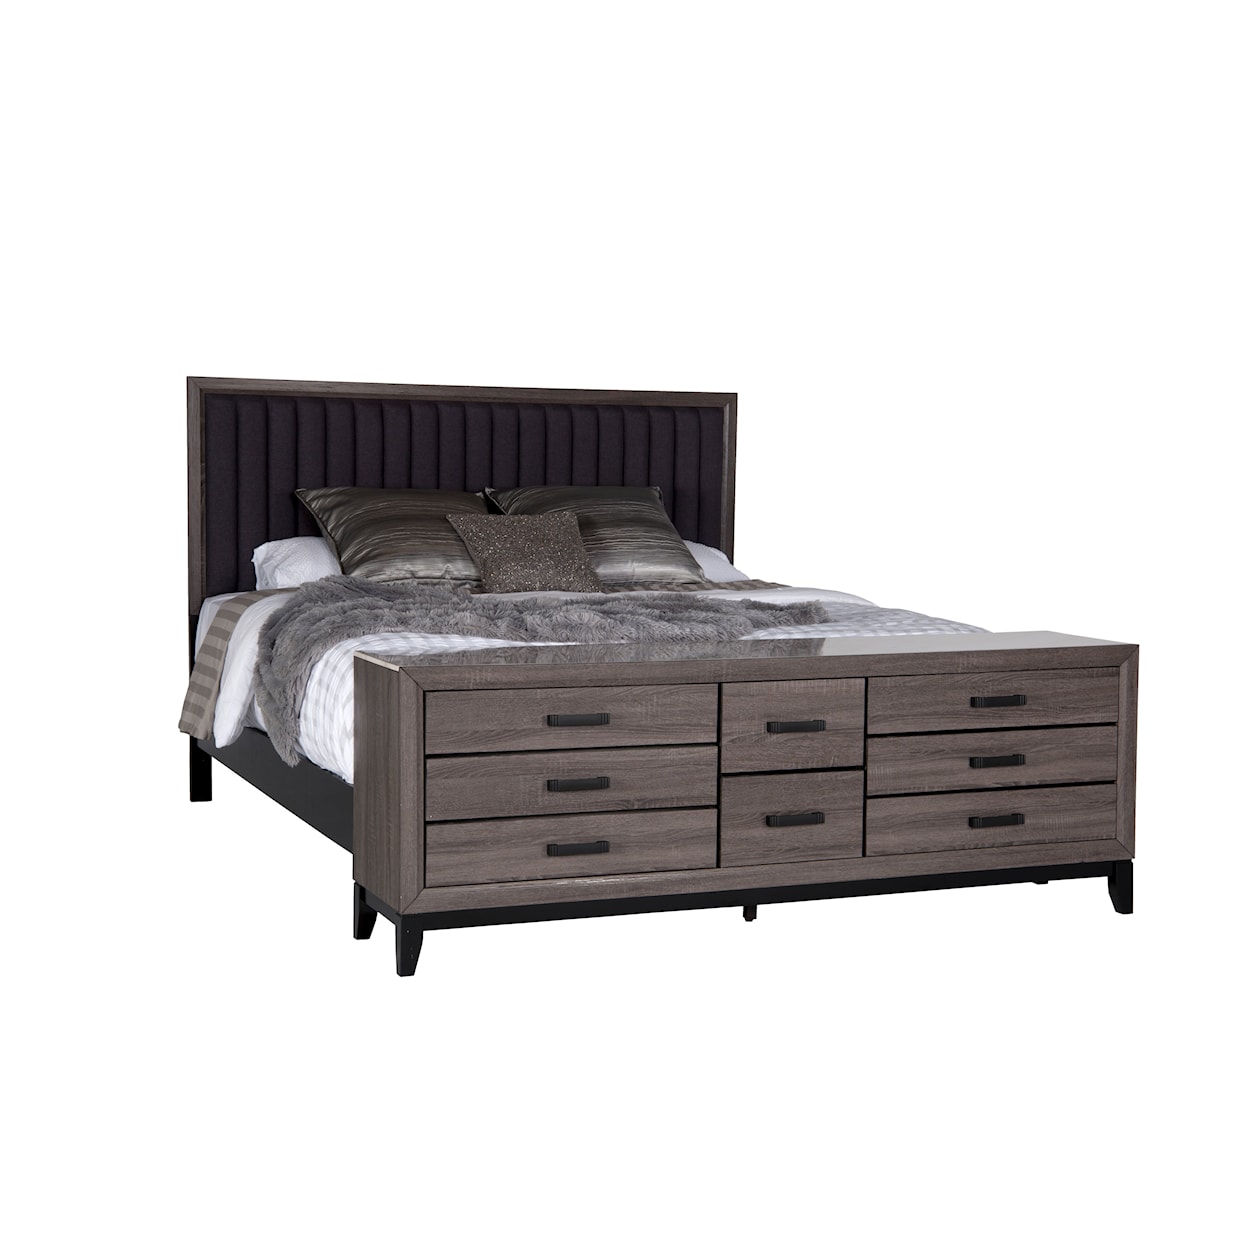 Global Furniture LAURA Full Bed with Storage